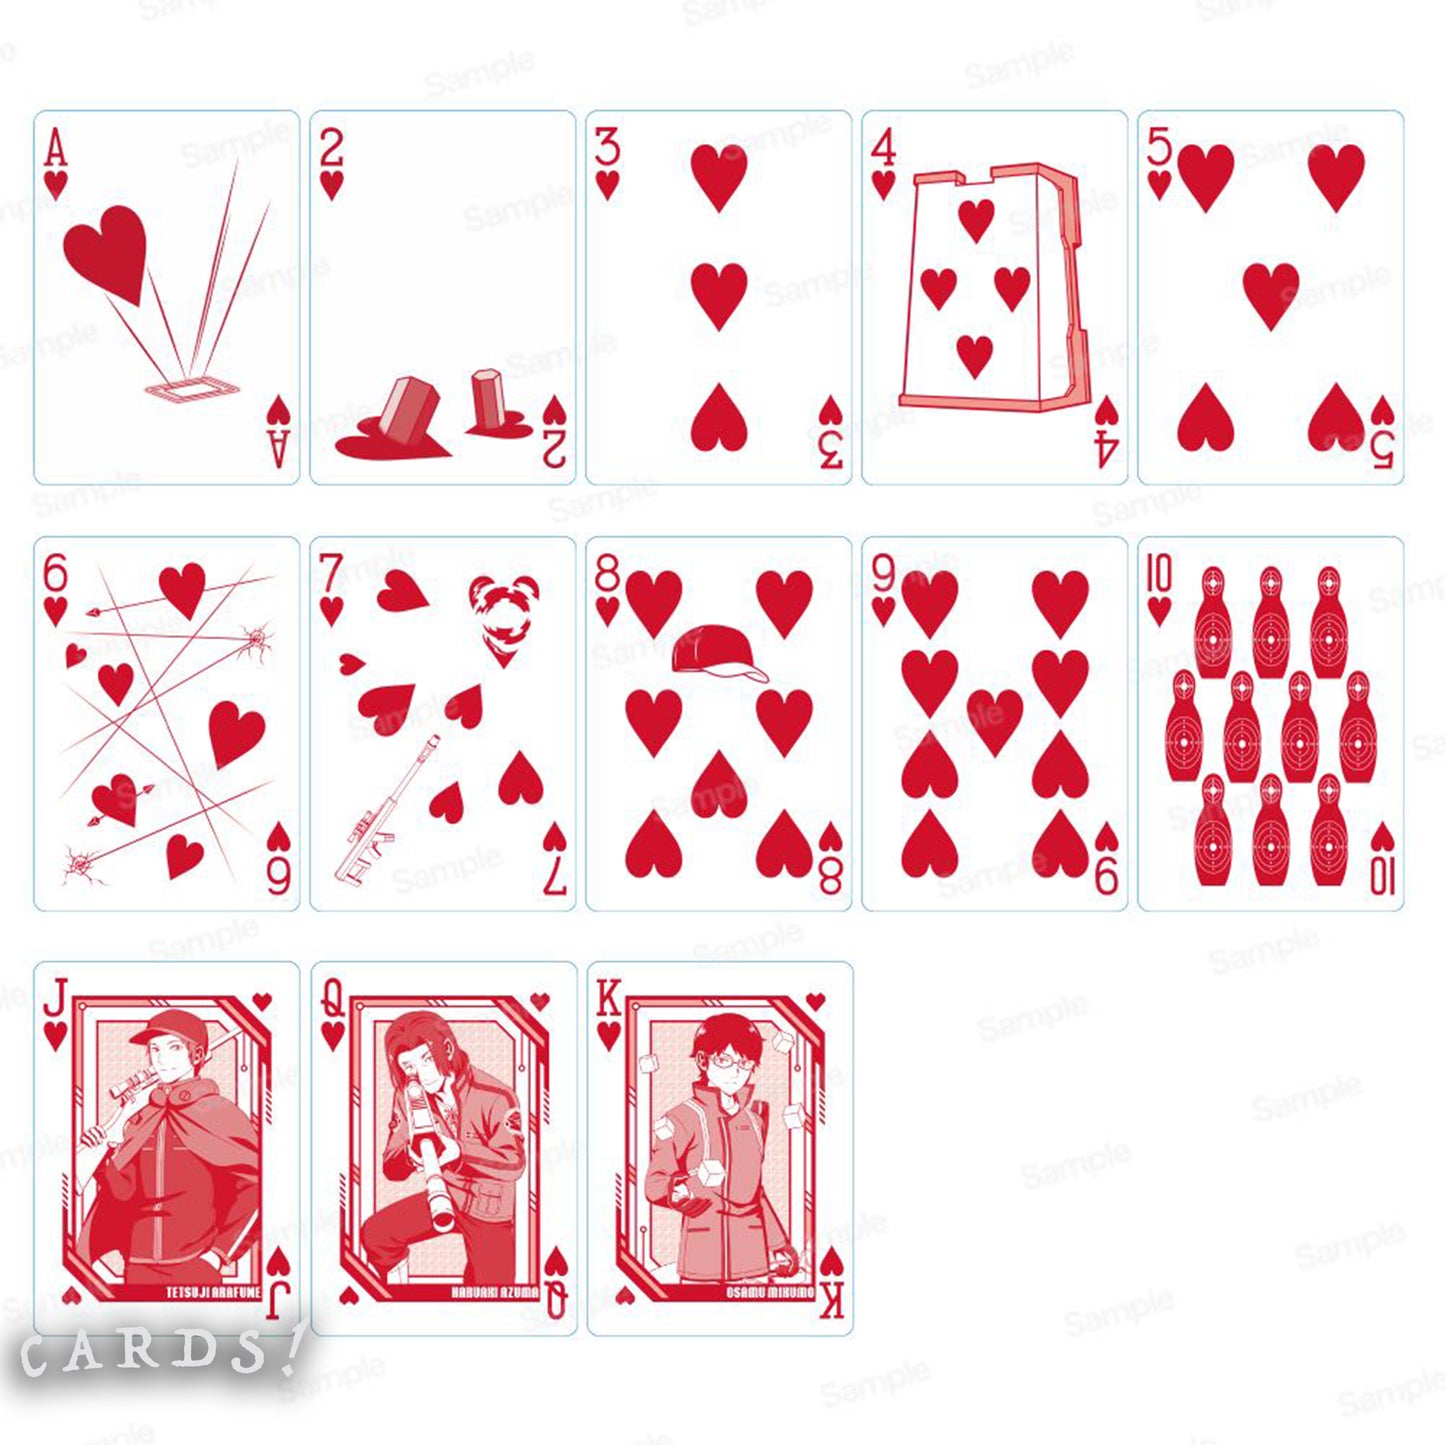 Bicycle® World Trigger Playing Cards